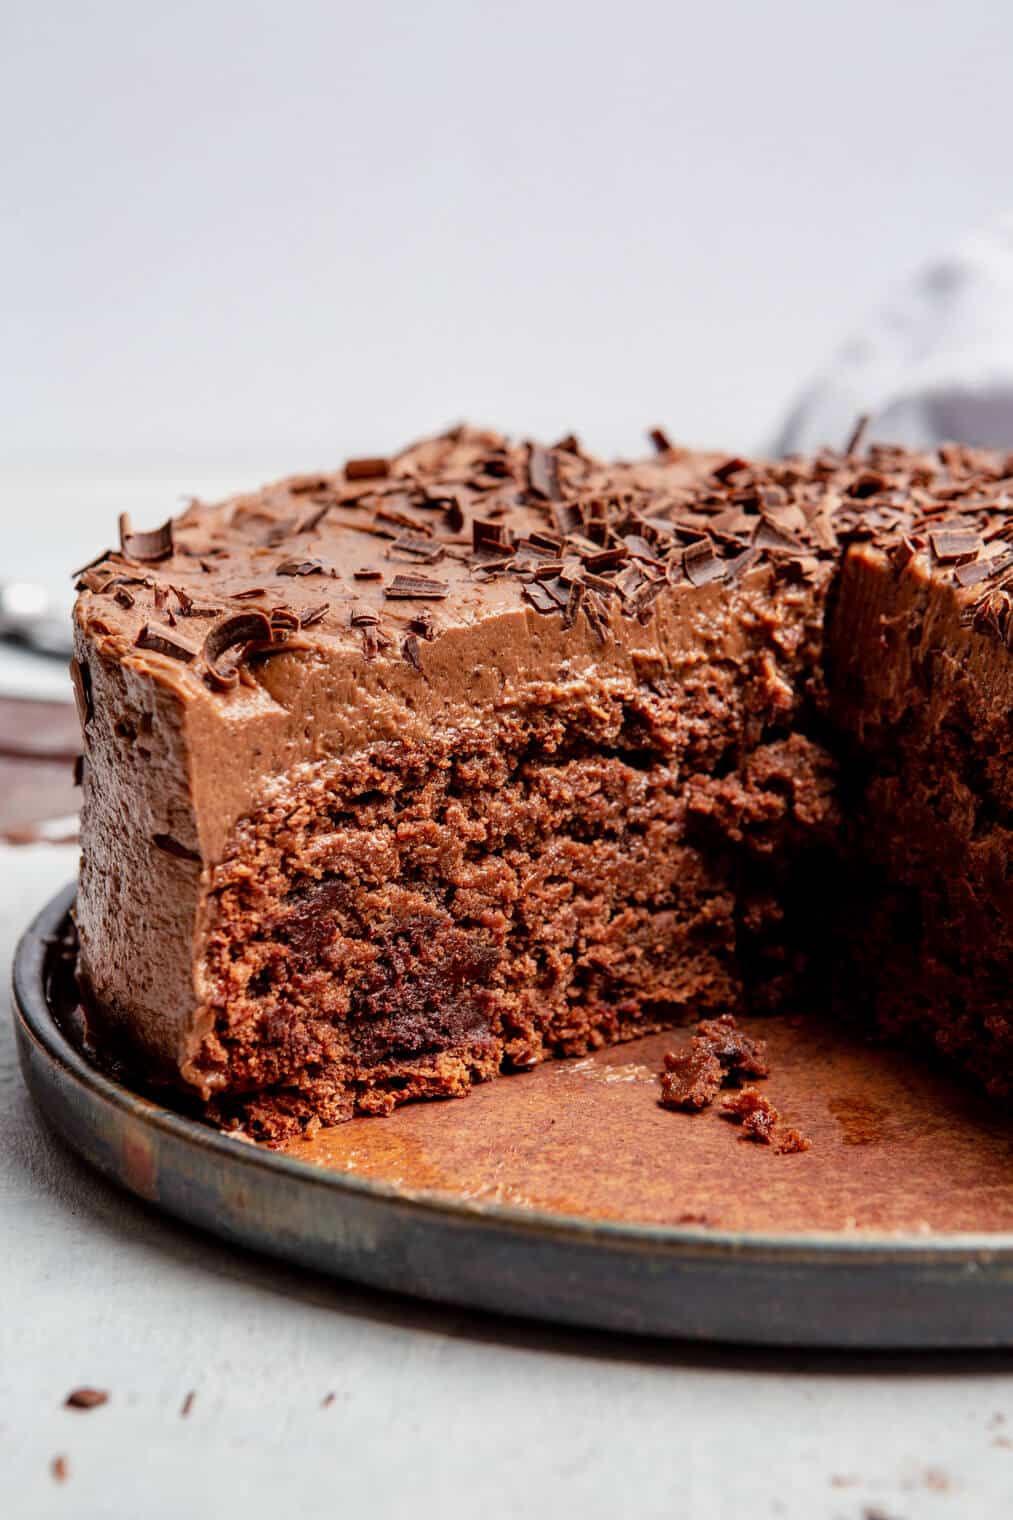 Side view of a single layer chocolate cake coated with chocolate frosting and shaved chocolate on top. The cake is sitting on a black plate with a rust colored brown interior and has a slice removed.